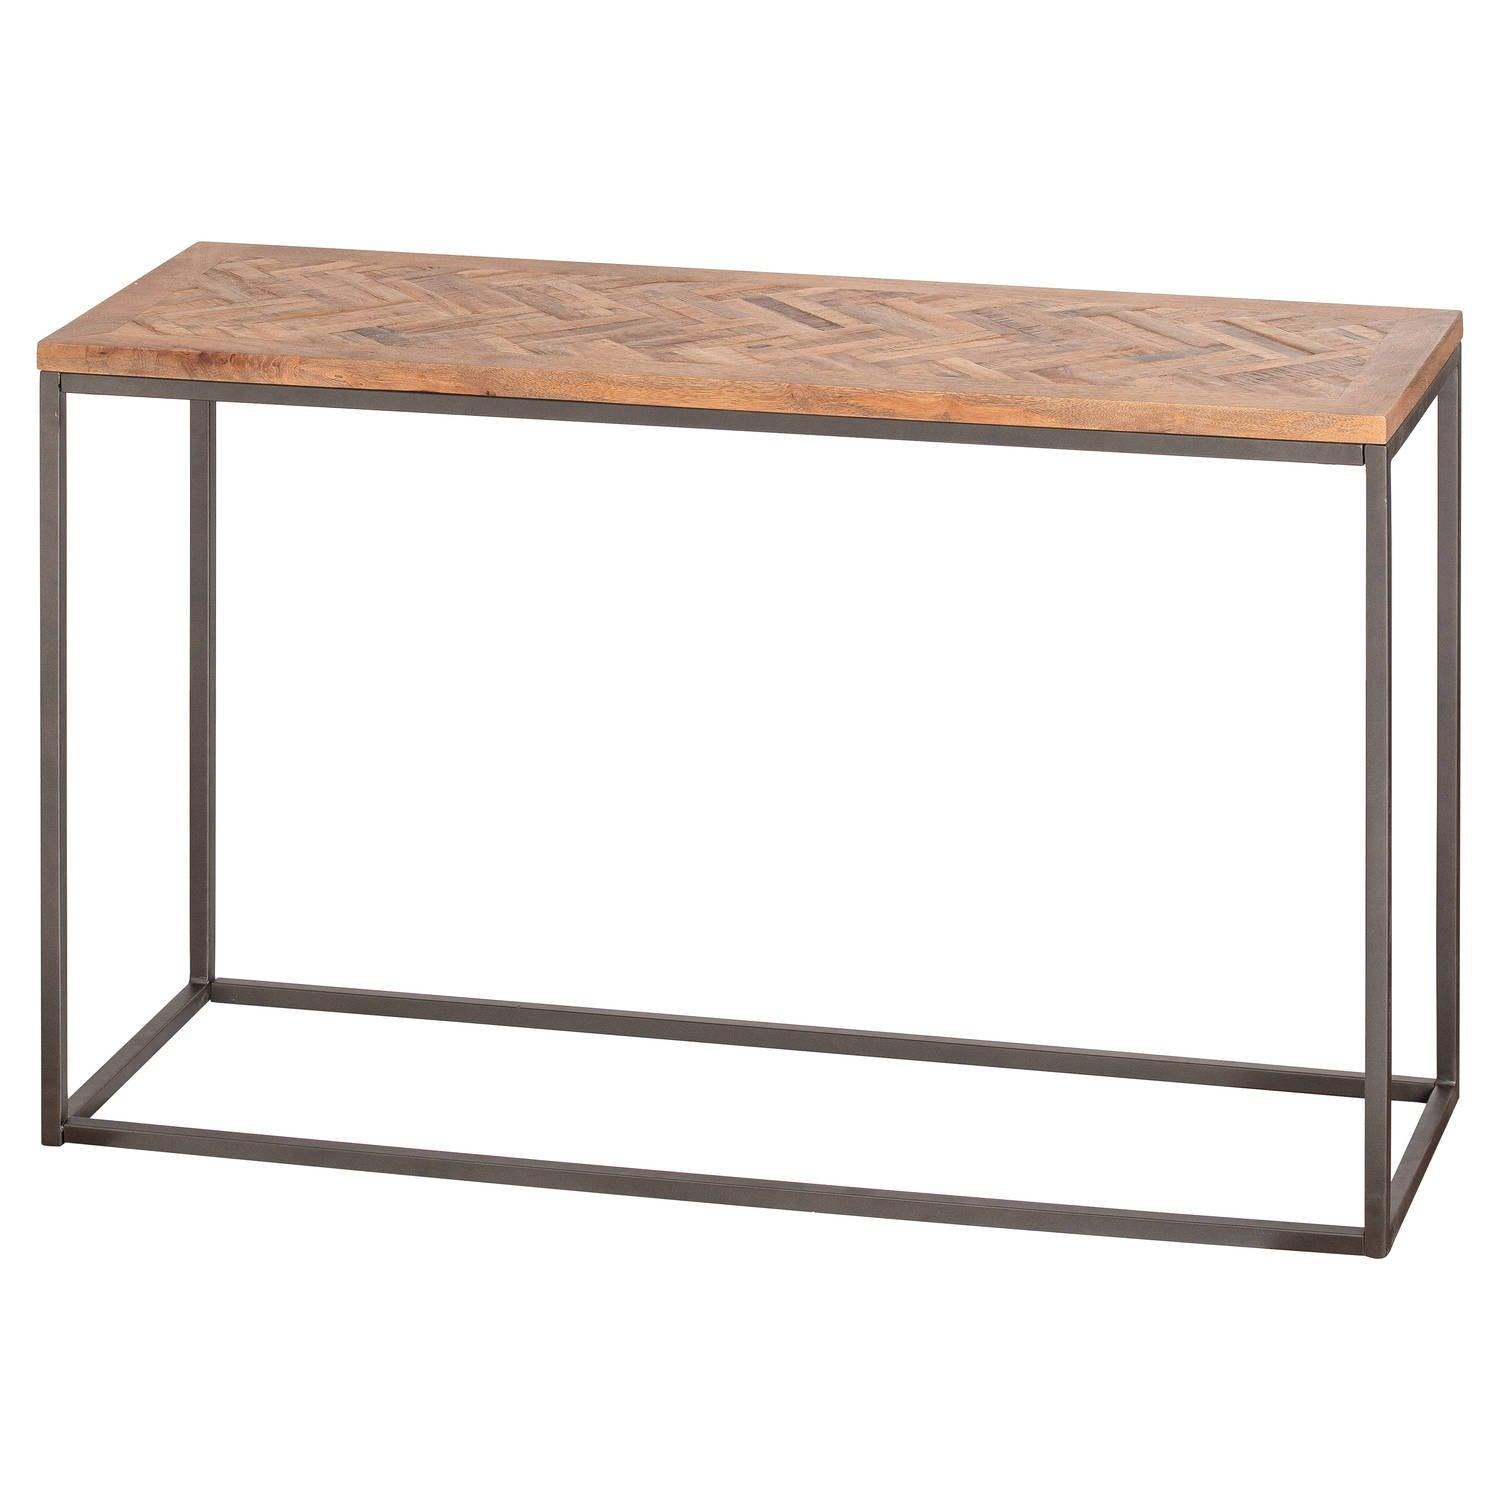 Hoxton Collection Console Table With Parquet Top - Vookoo Lifestyle